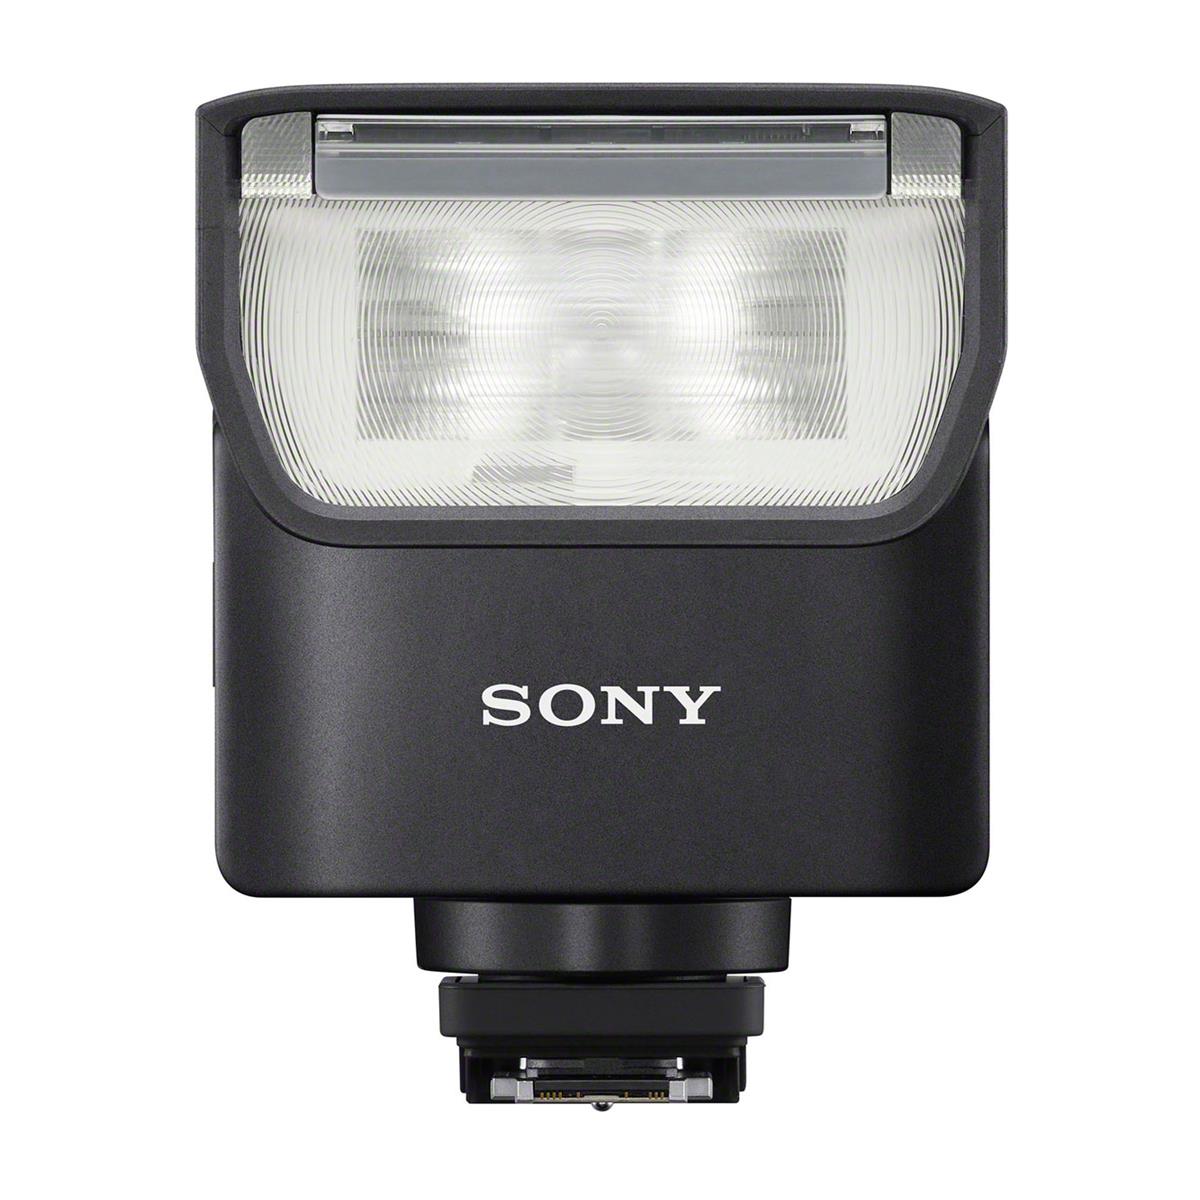 Image of Sony Alpha HVL-F28RM External Flash with Wireless Remote Control